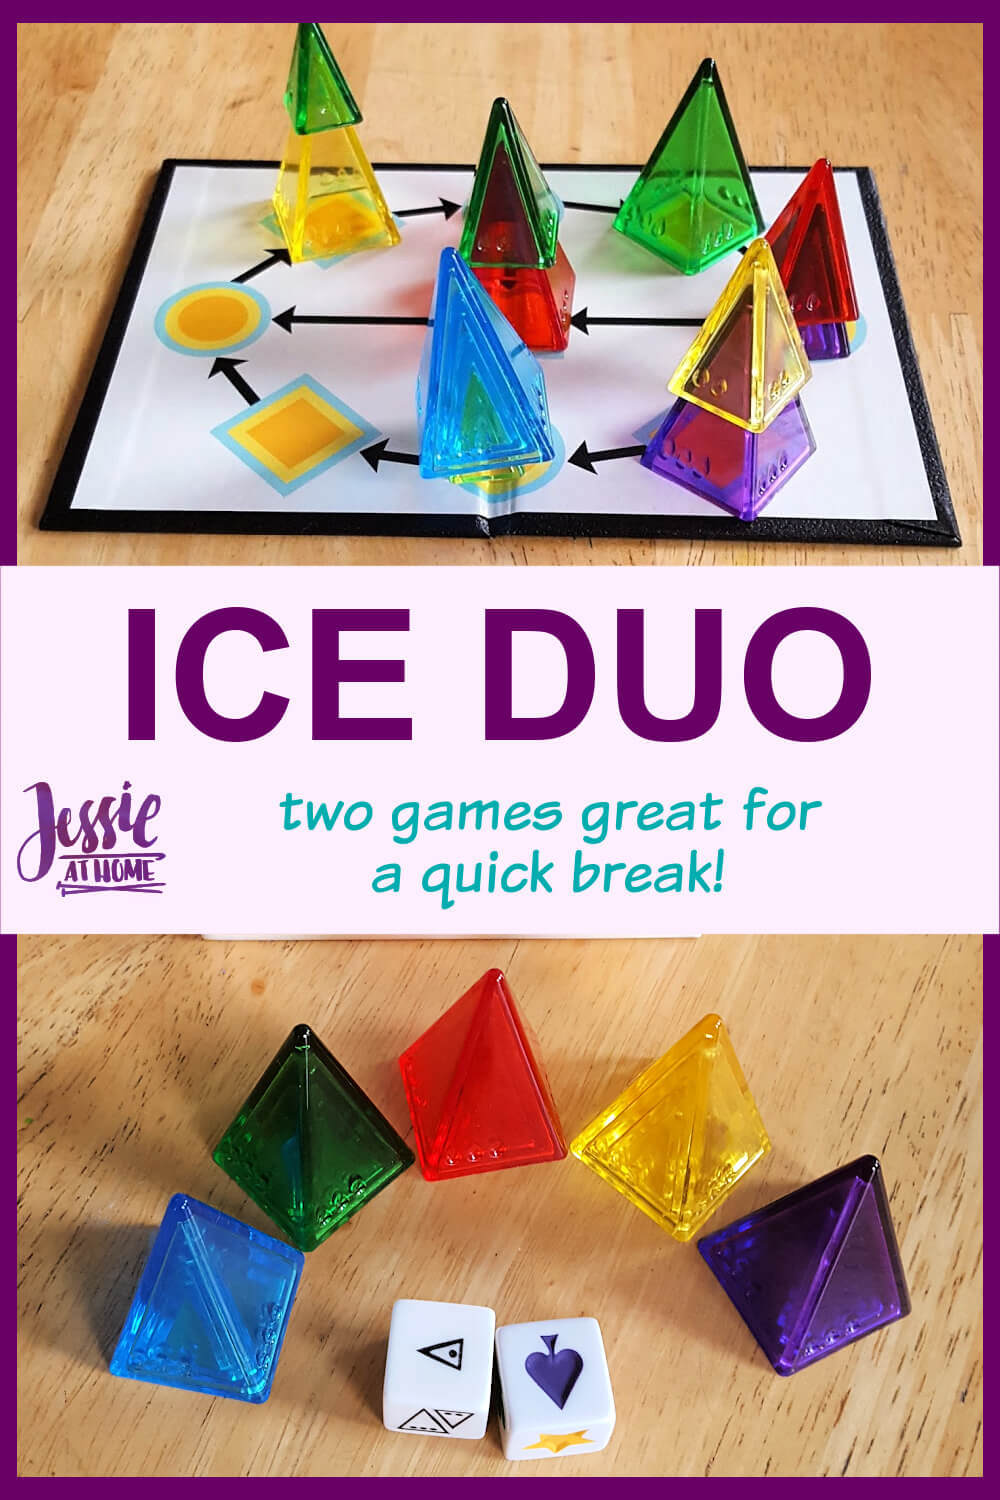 Ice Duo - two games that are great for a quick break!